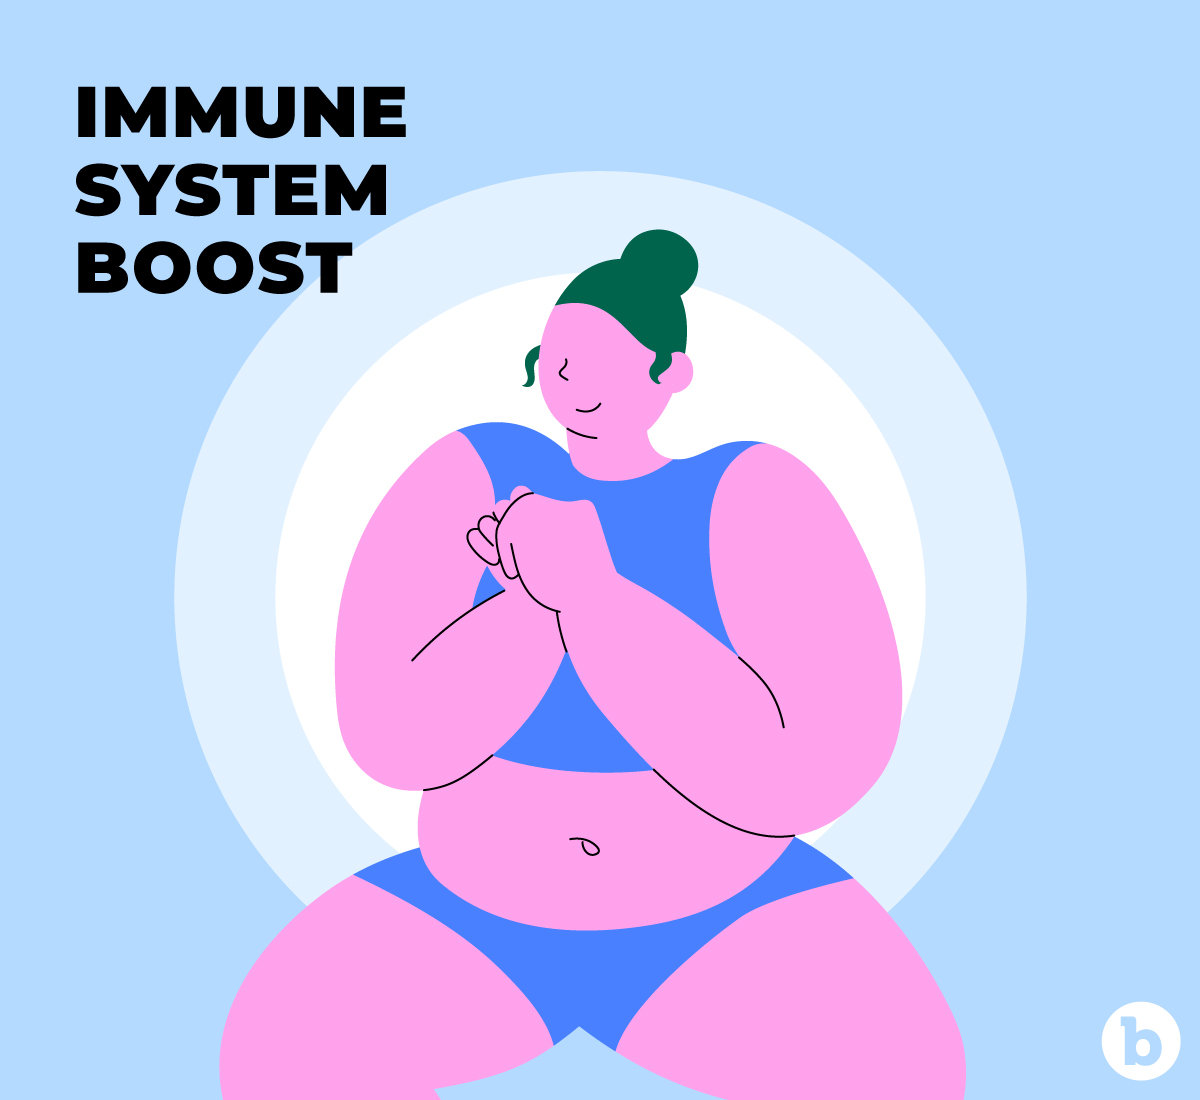 Pleasuring yourself regularly can also help boost your immune system